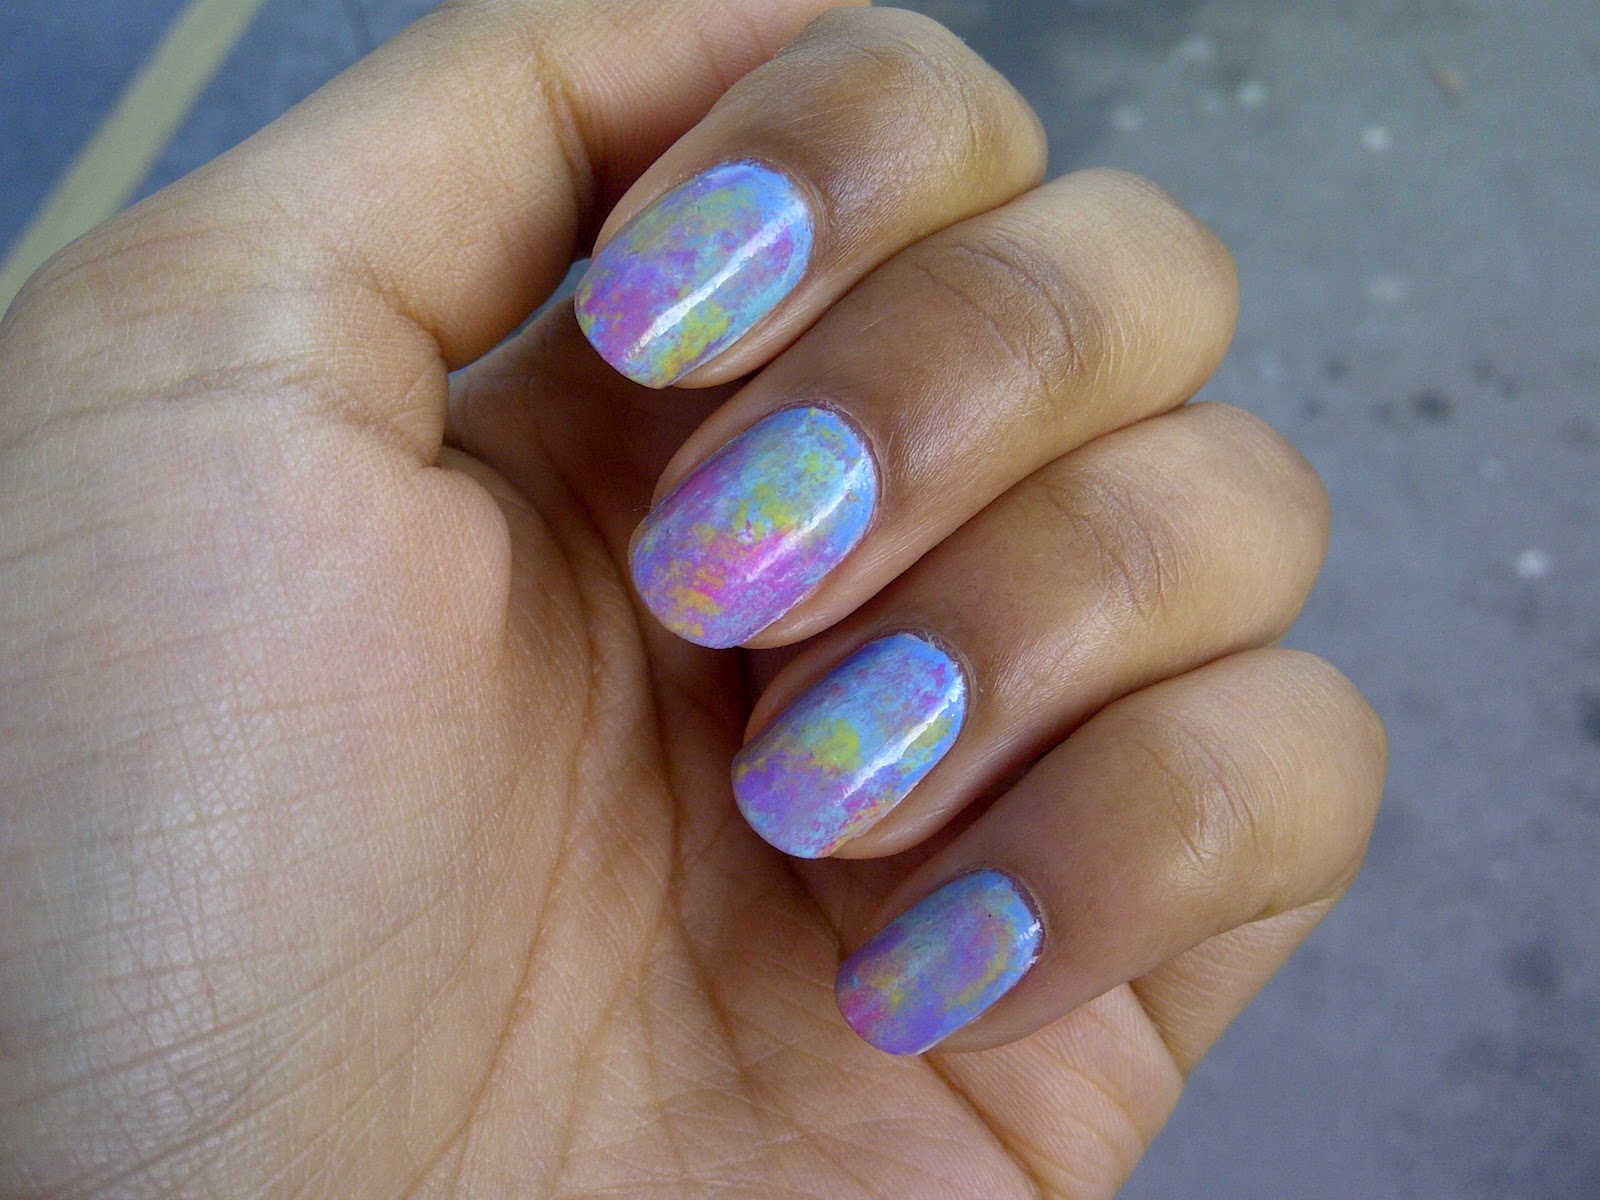 10. Red and Purple Tie-Dye Nails for a Fun Summer Look - wide 3